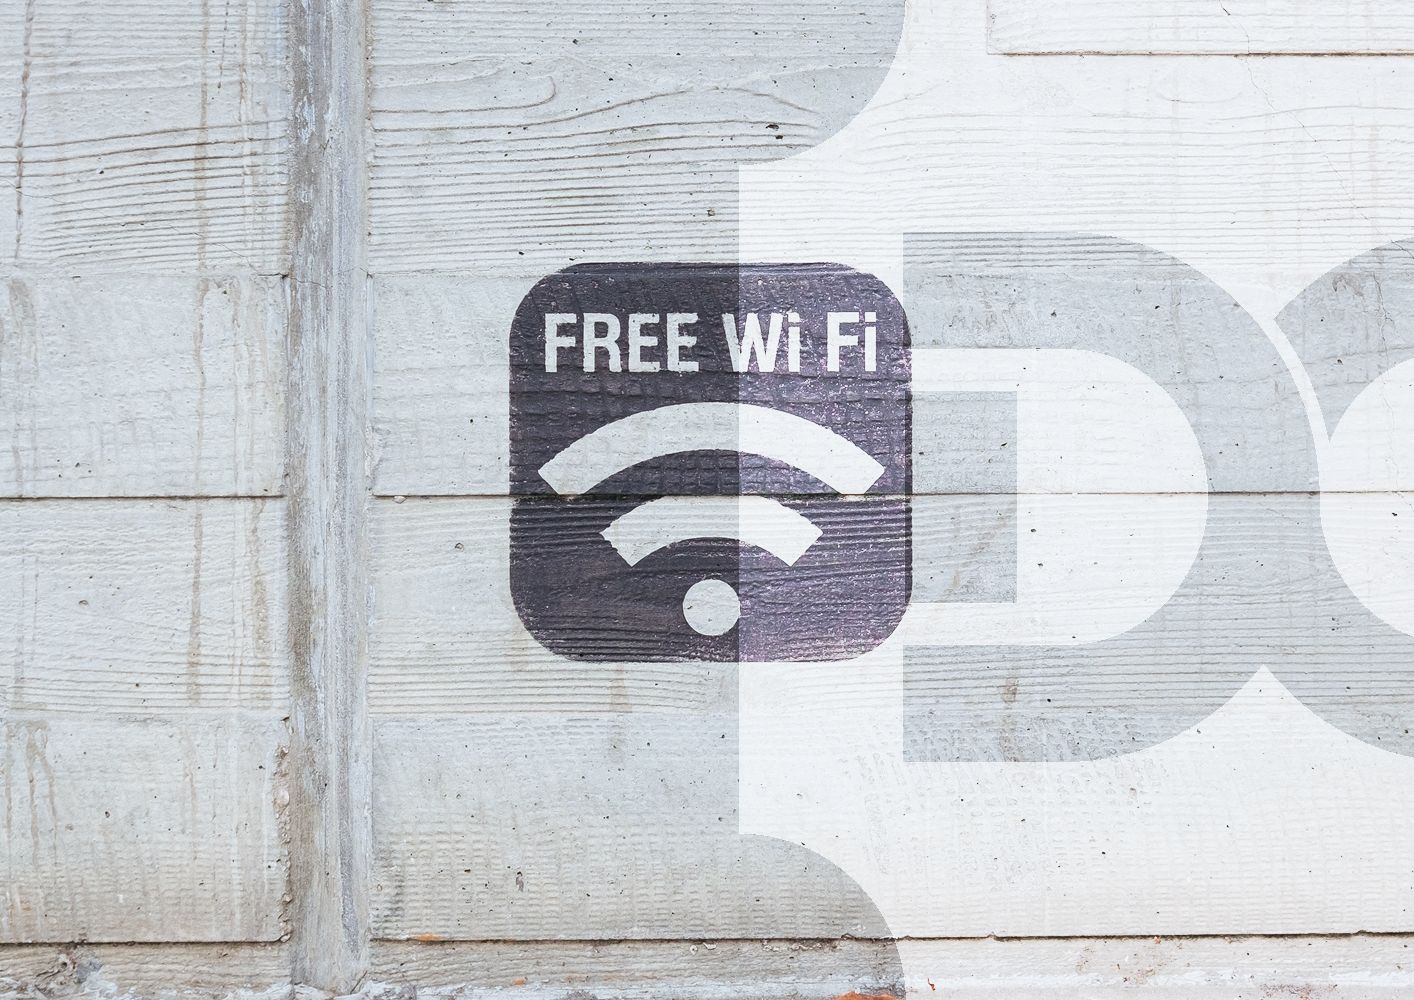 Free Wi-Fi for Adelaide residents